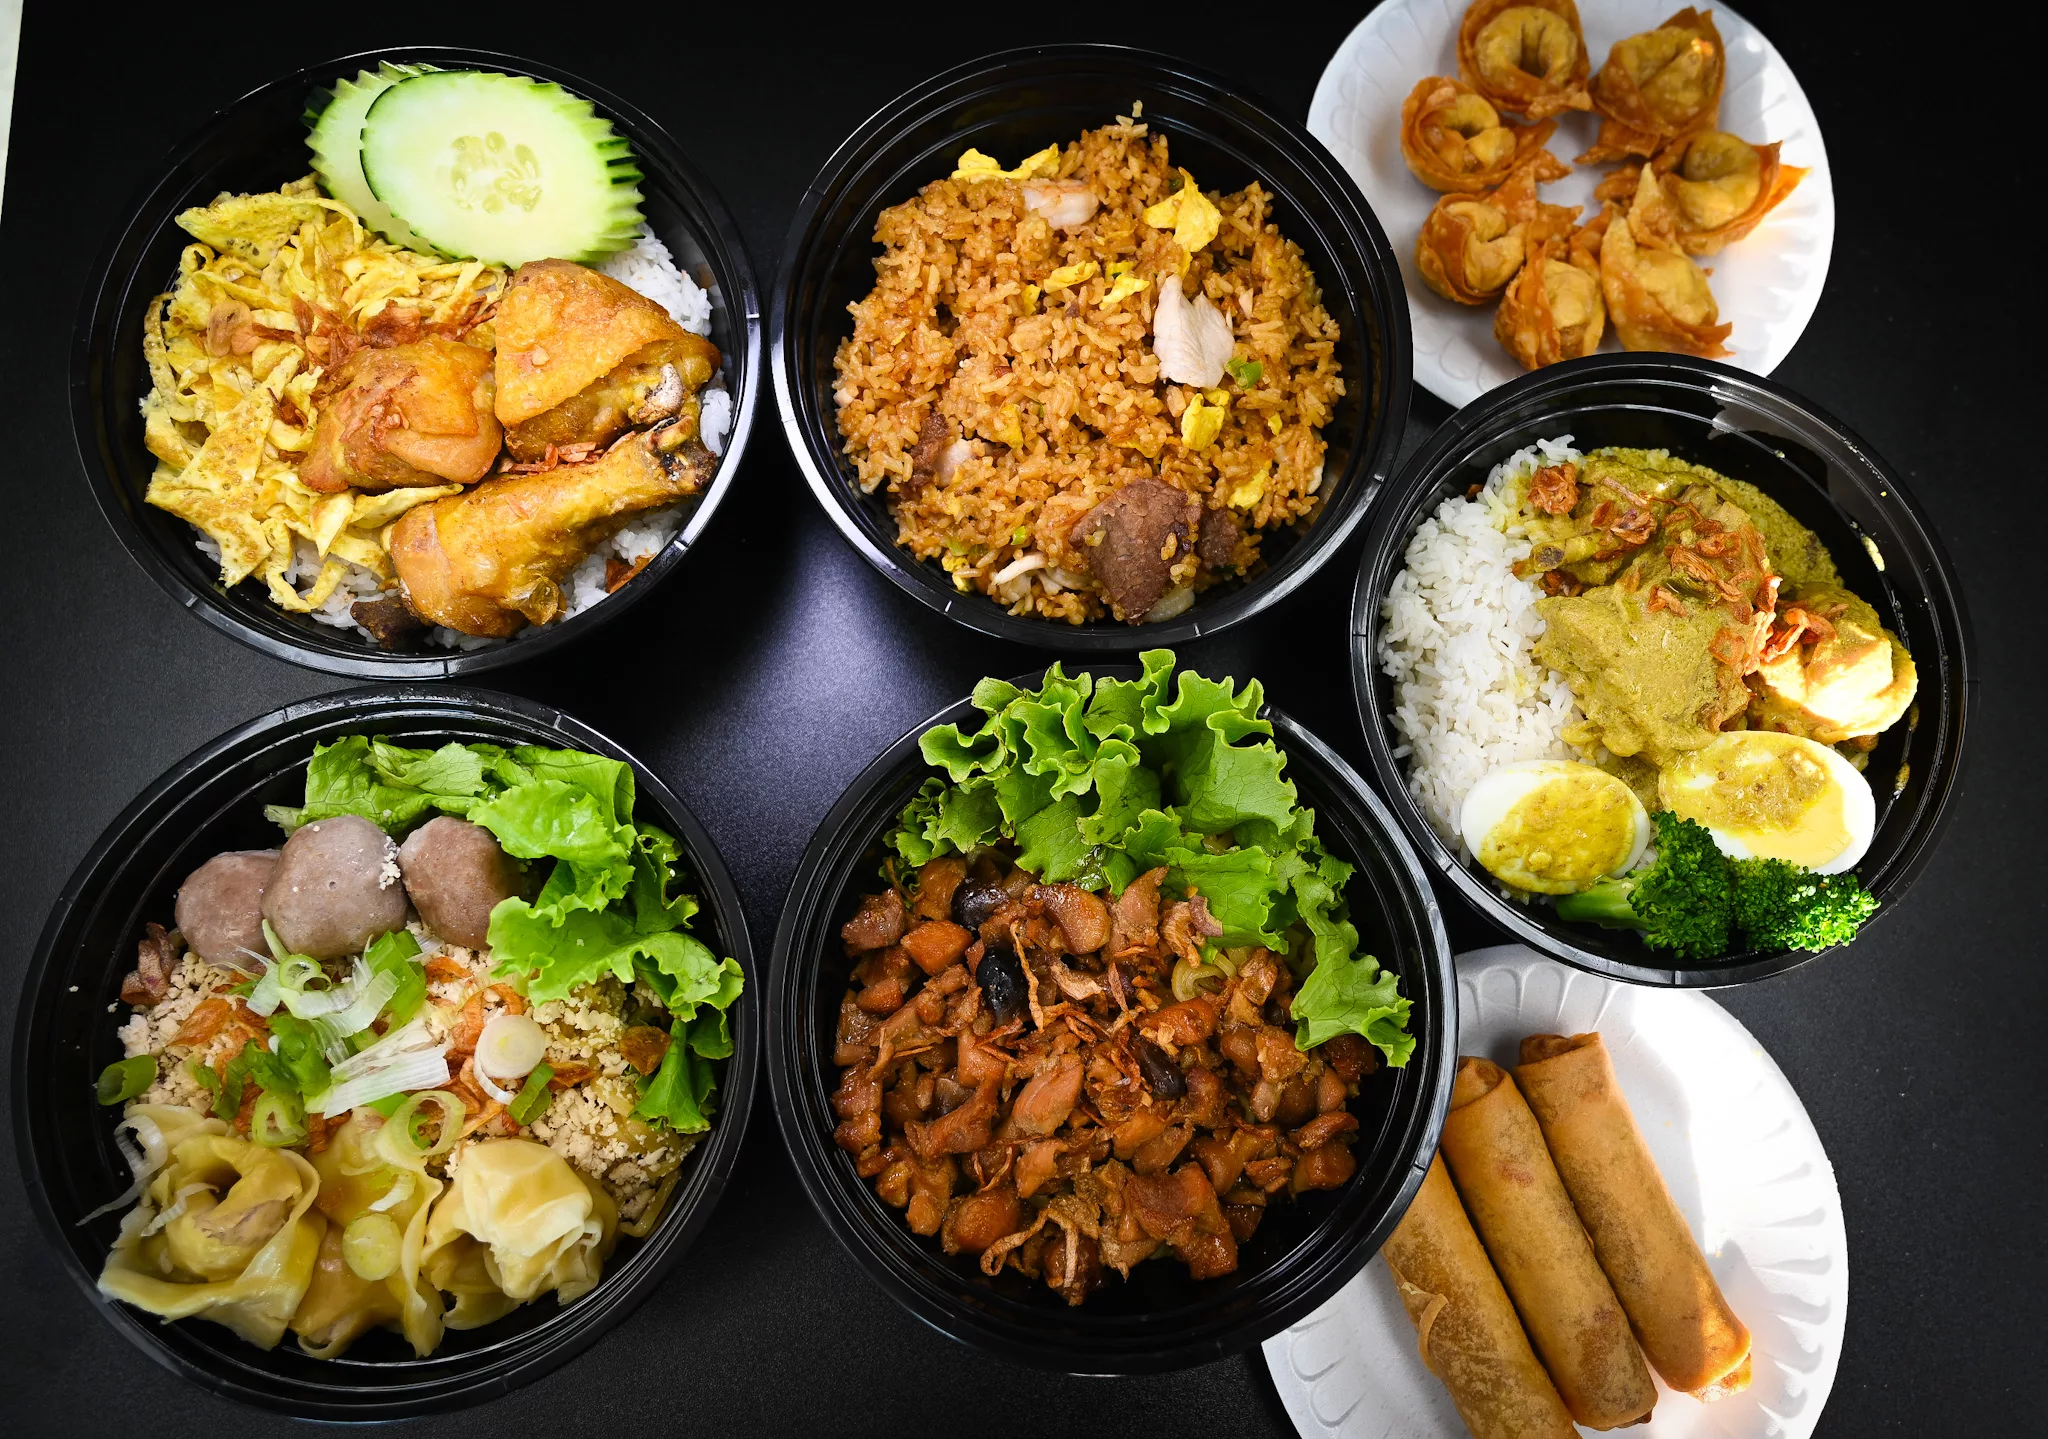 Sisters to open new Indonesian restaurant Bento & Bowl next week in  Rockford